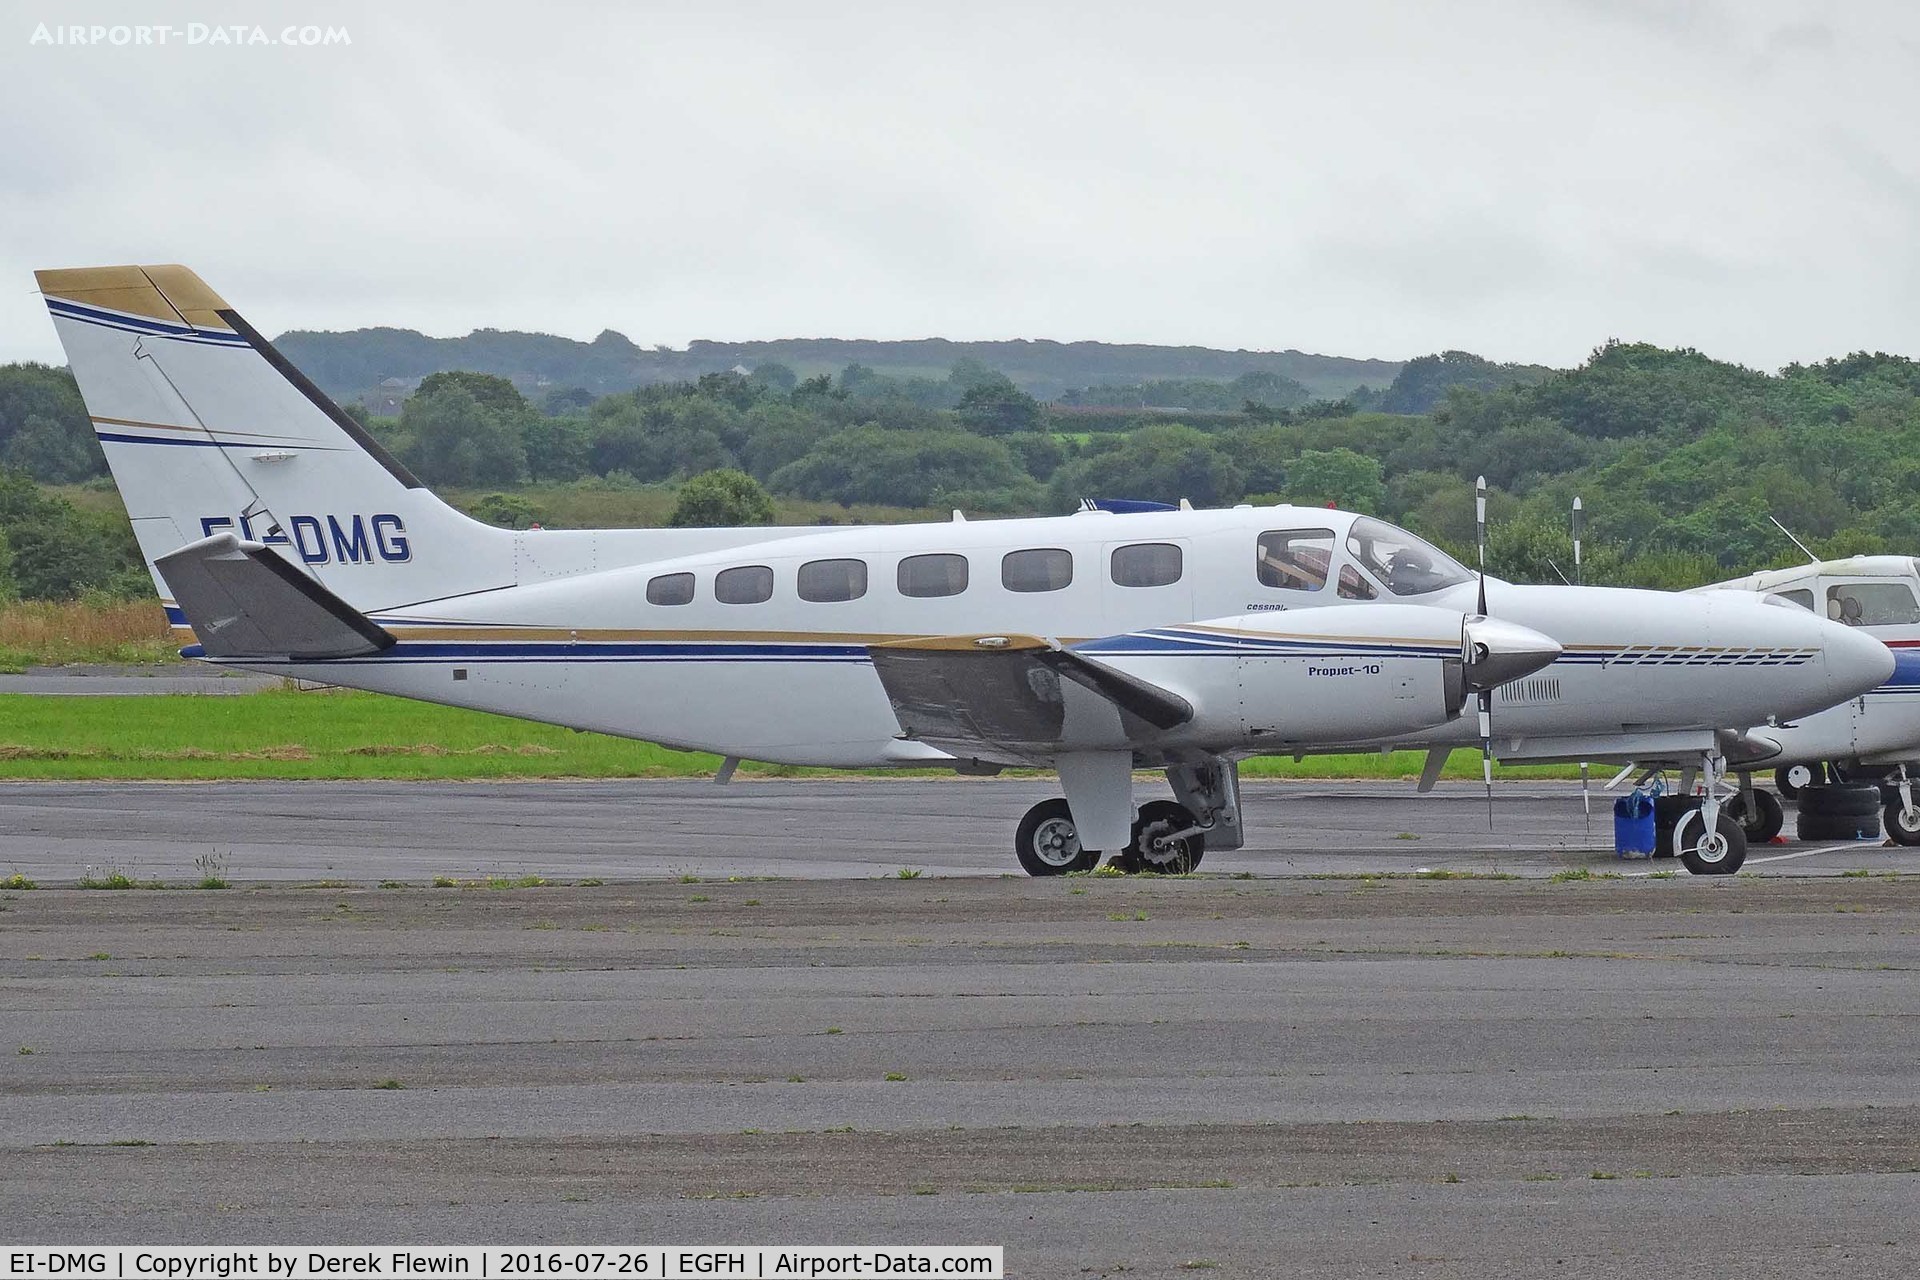 EI-DMG, 1980 Cessna 441 Conquest II C/N 441-0165, Conquest II, Dawn Meats Group Ltd, Waterford based, previously N27214, N140MP, seen parked up.